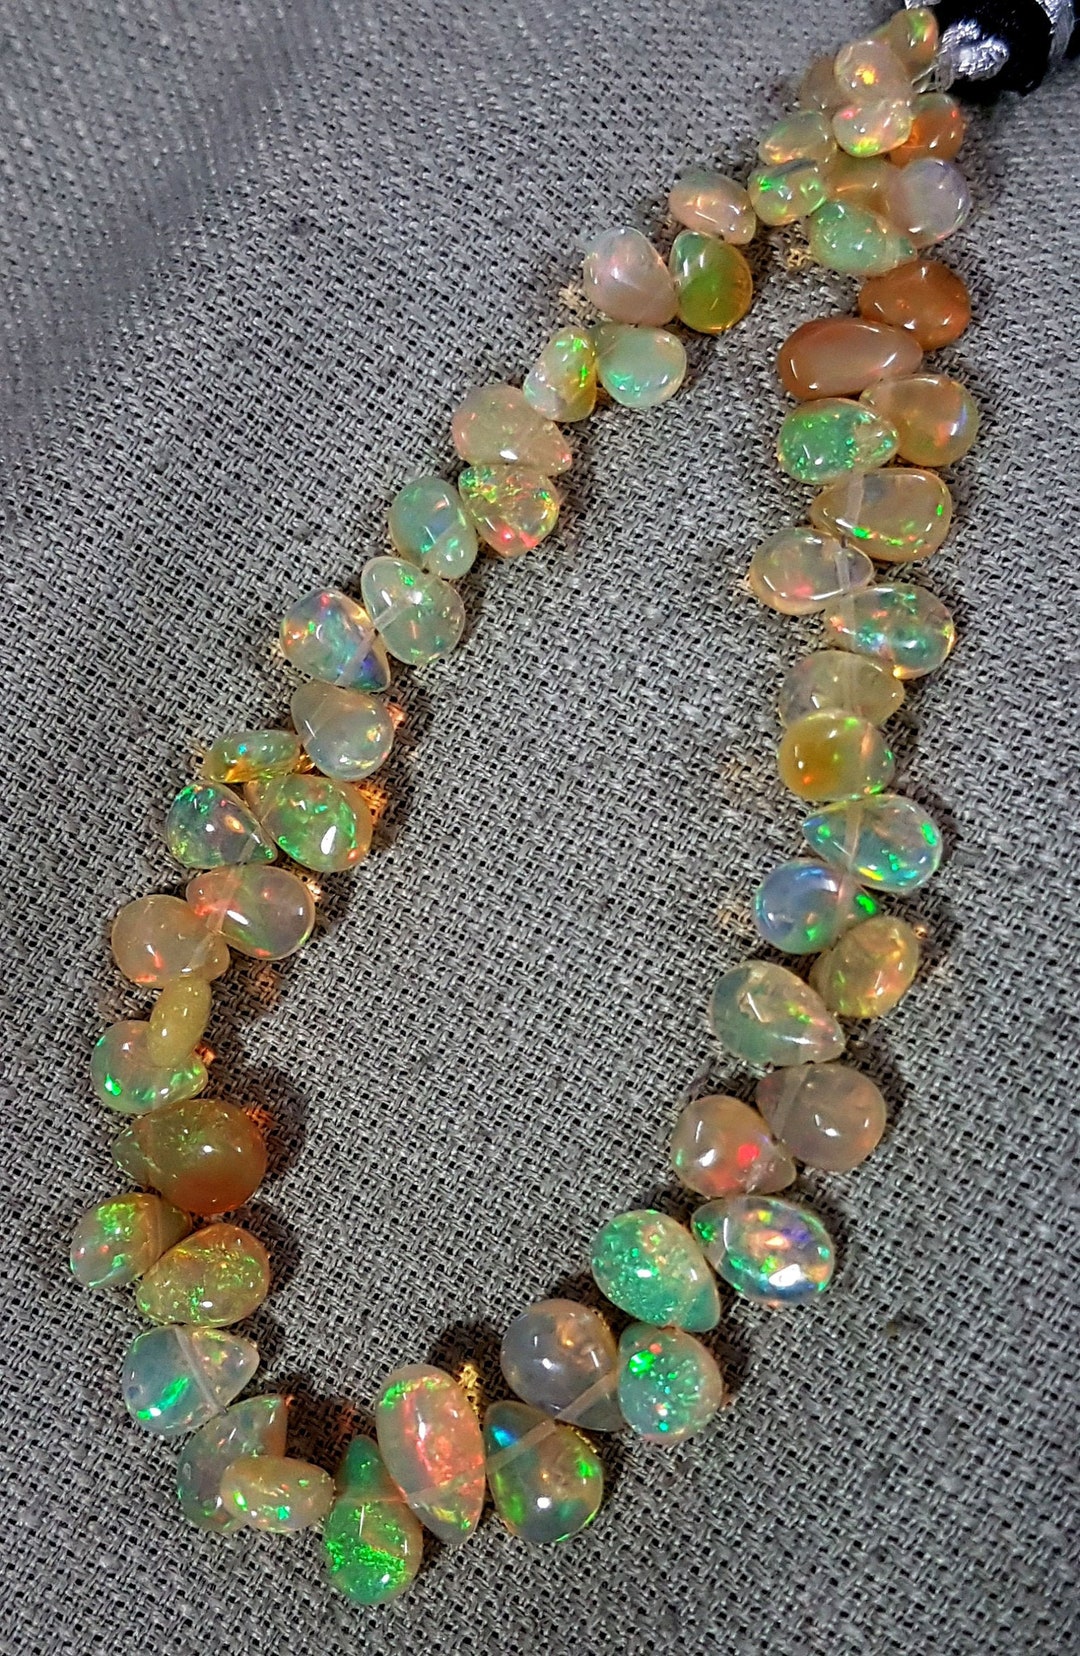 Natural ETHIOPIAN OPAL Gemstone Smooth Pear Shaped Beads Loose Beads ...